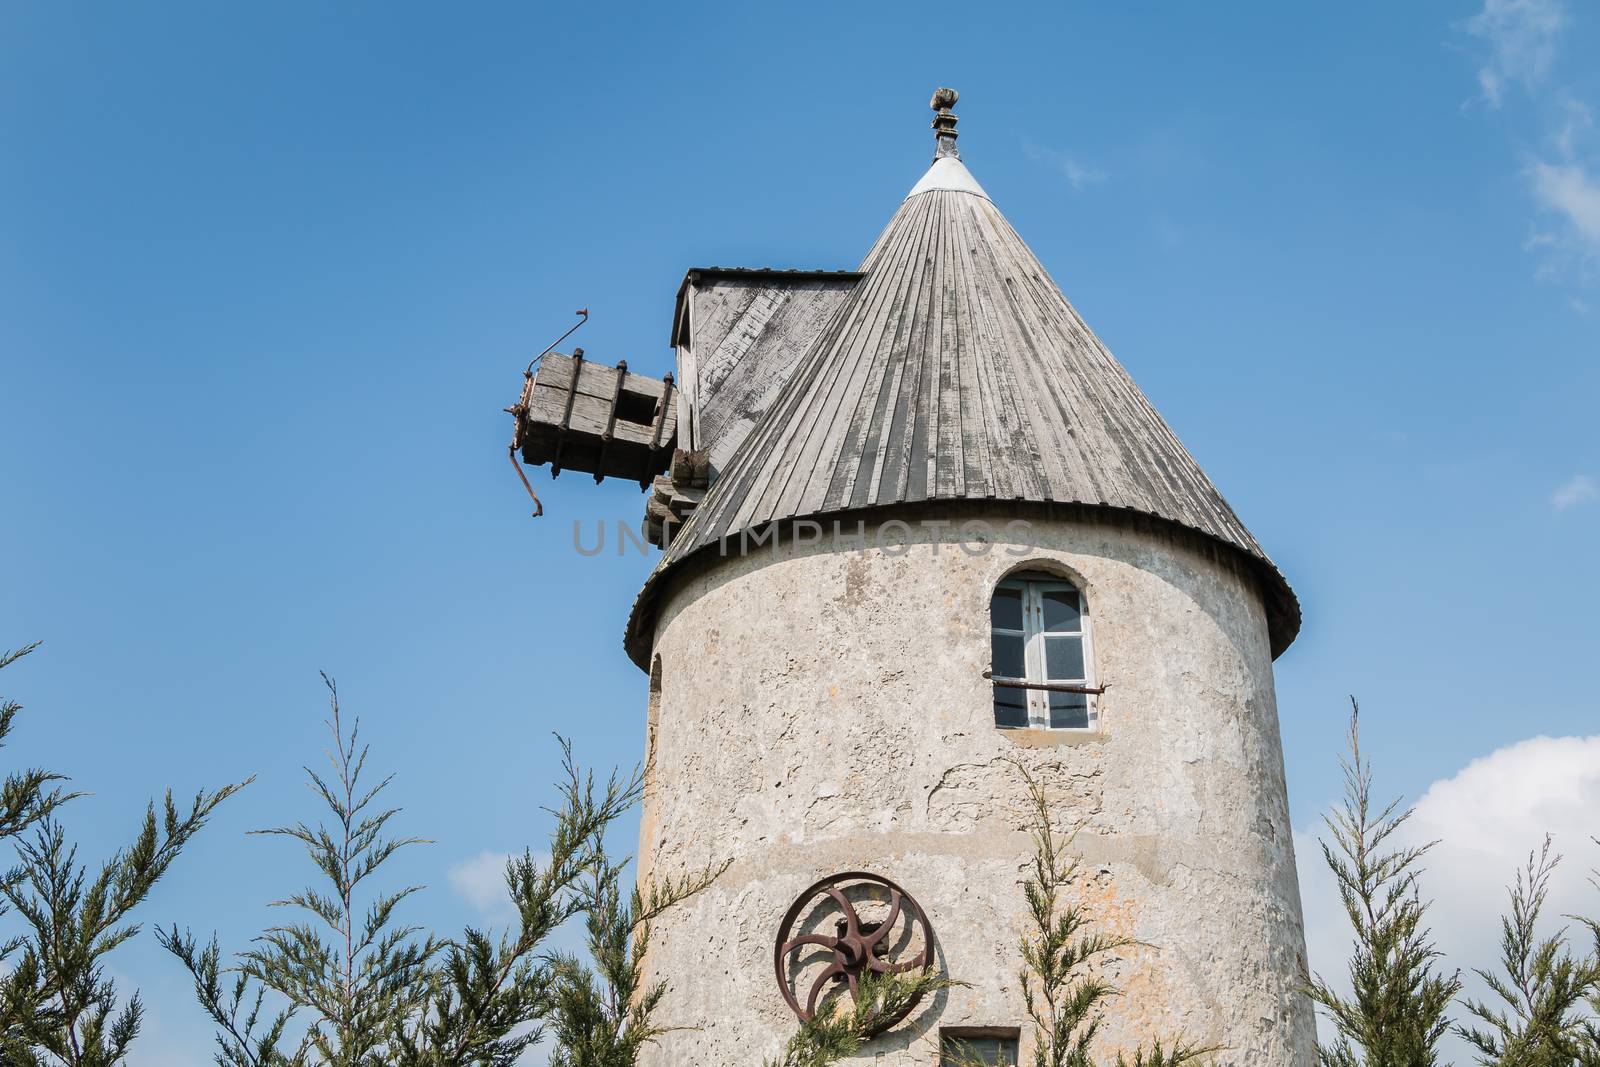 view of an old stone windmill out of use typical of the island o by AtlanticEUROSTOXX